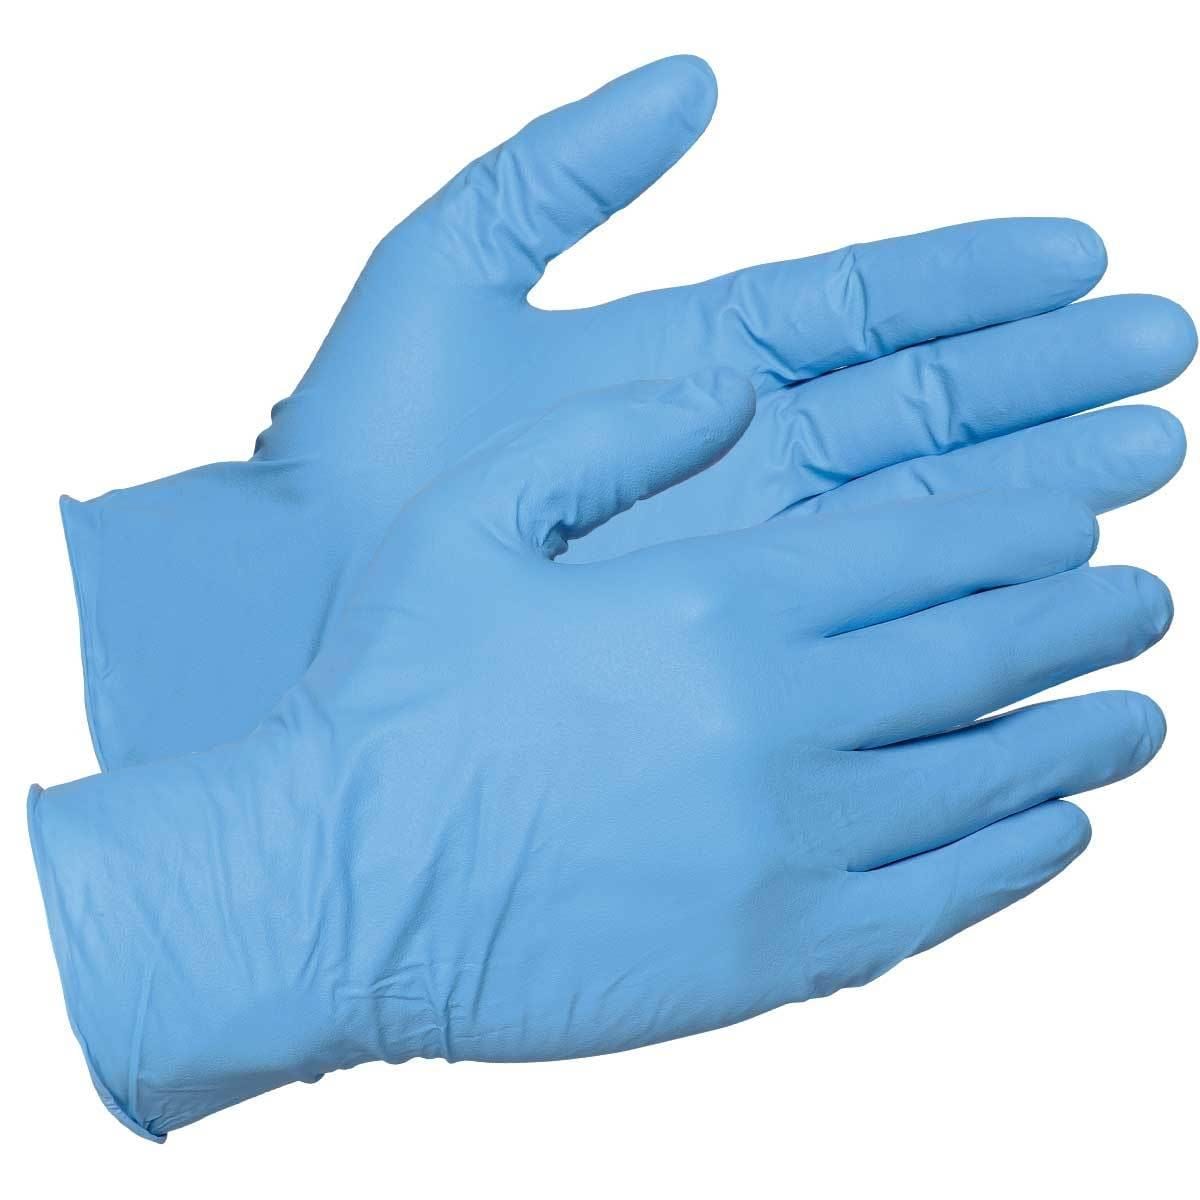 Gemplers 8-mil Disposable Nitrile Gloves | Box of 50 Gloves